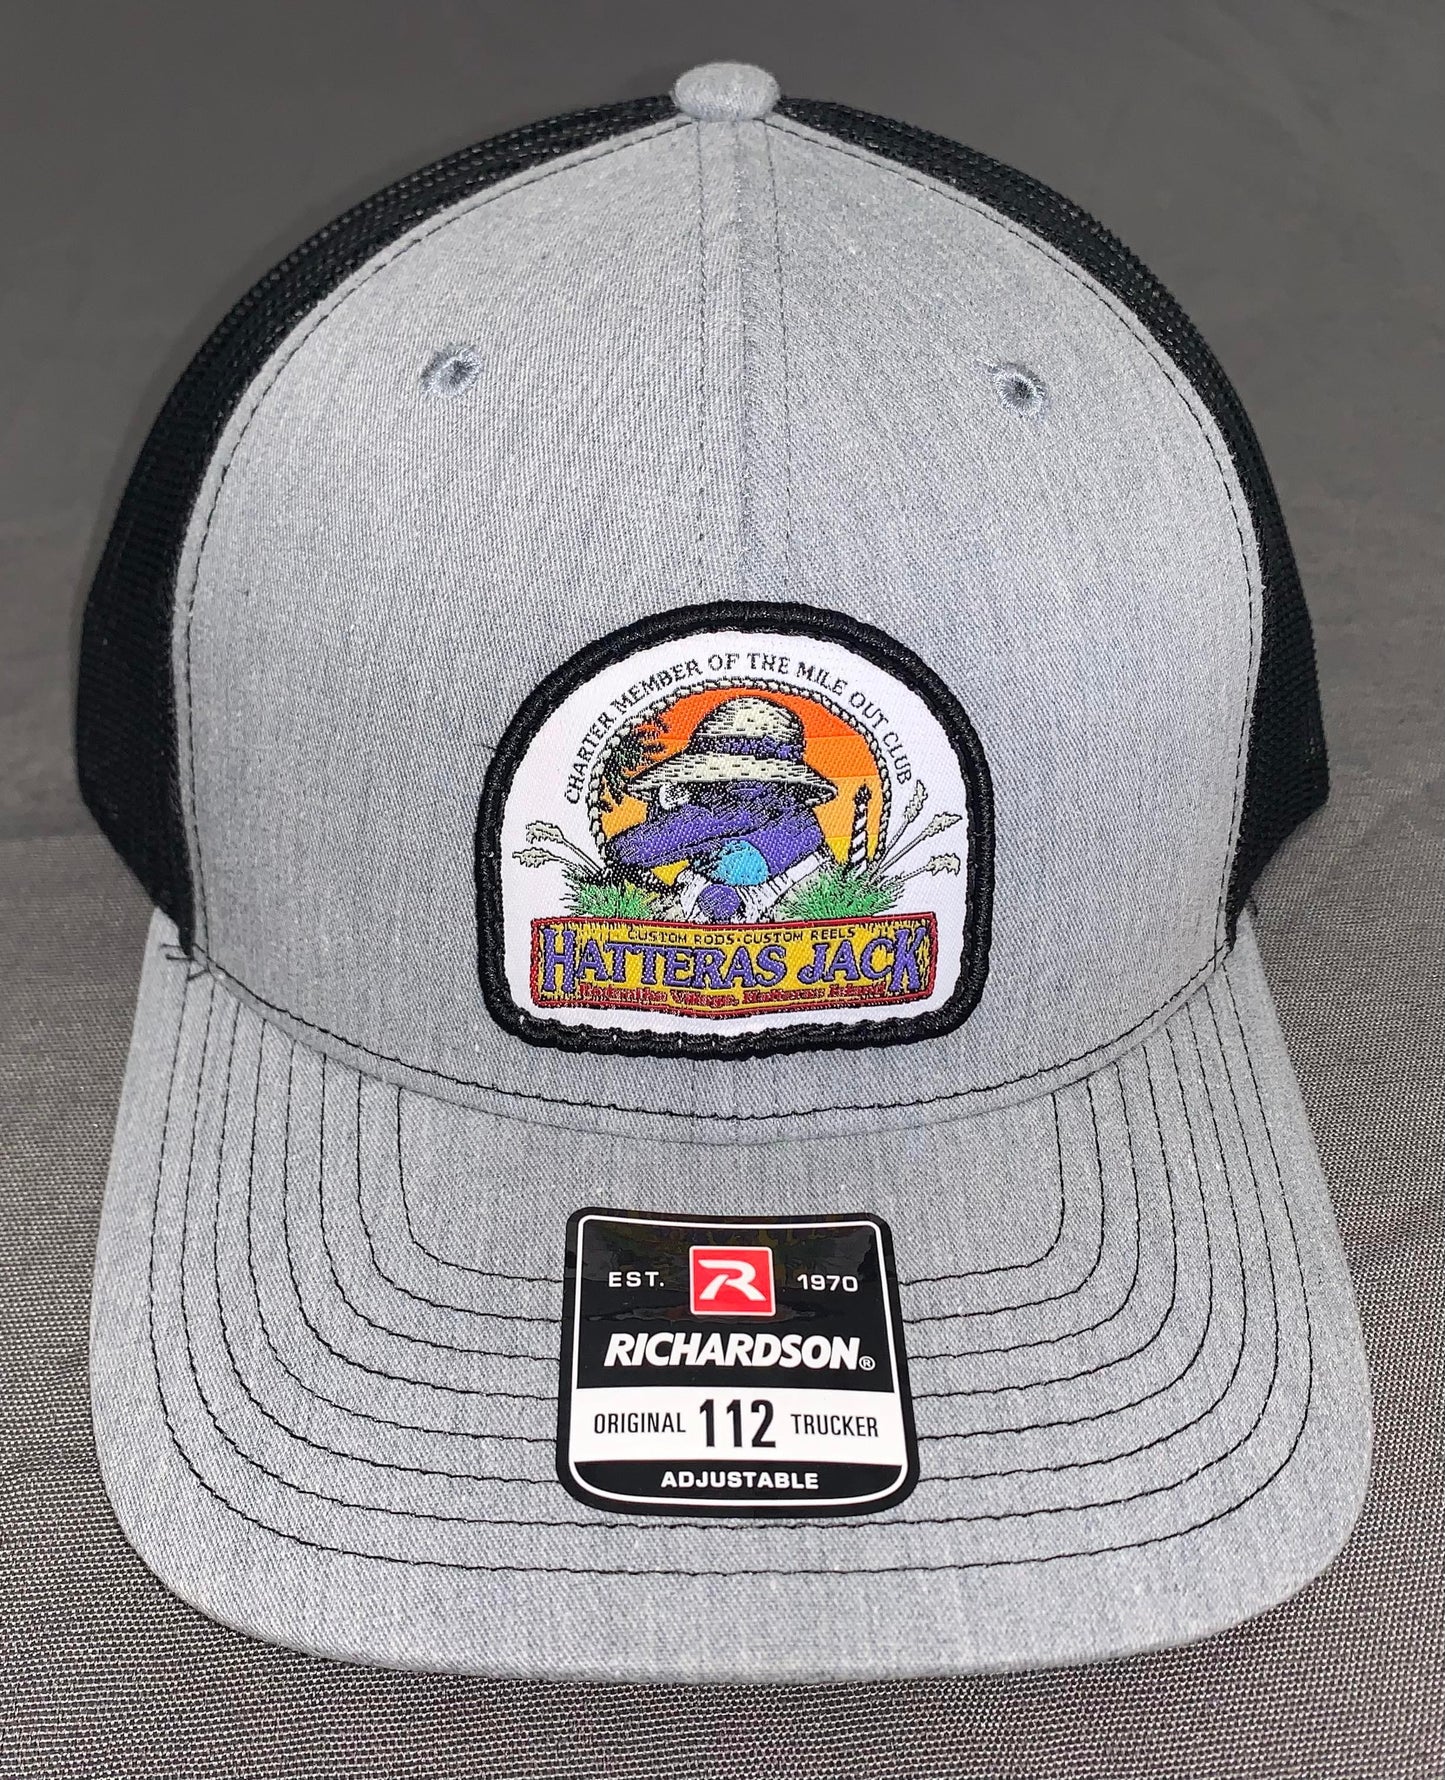 Hatteras Jack Ball Cap with Patch Logo